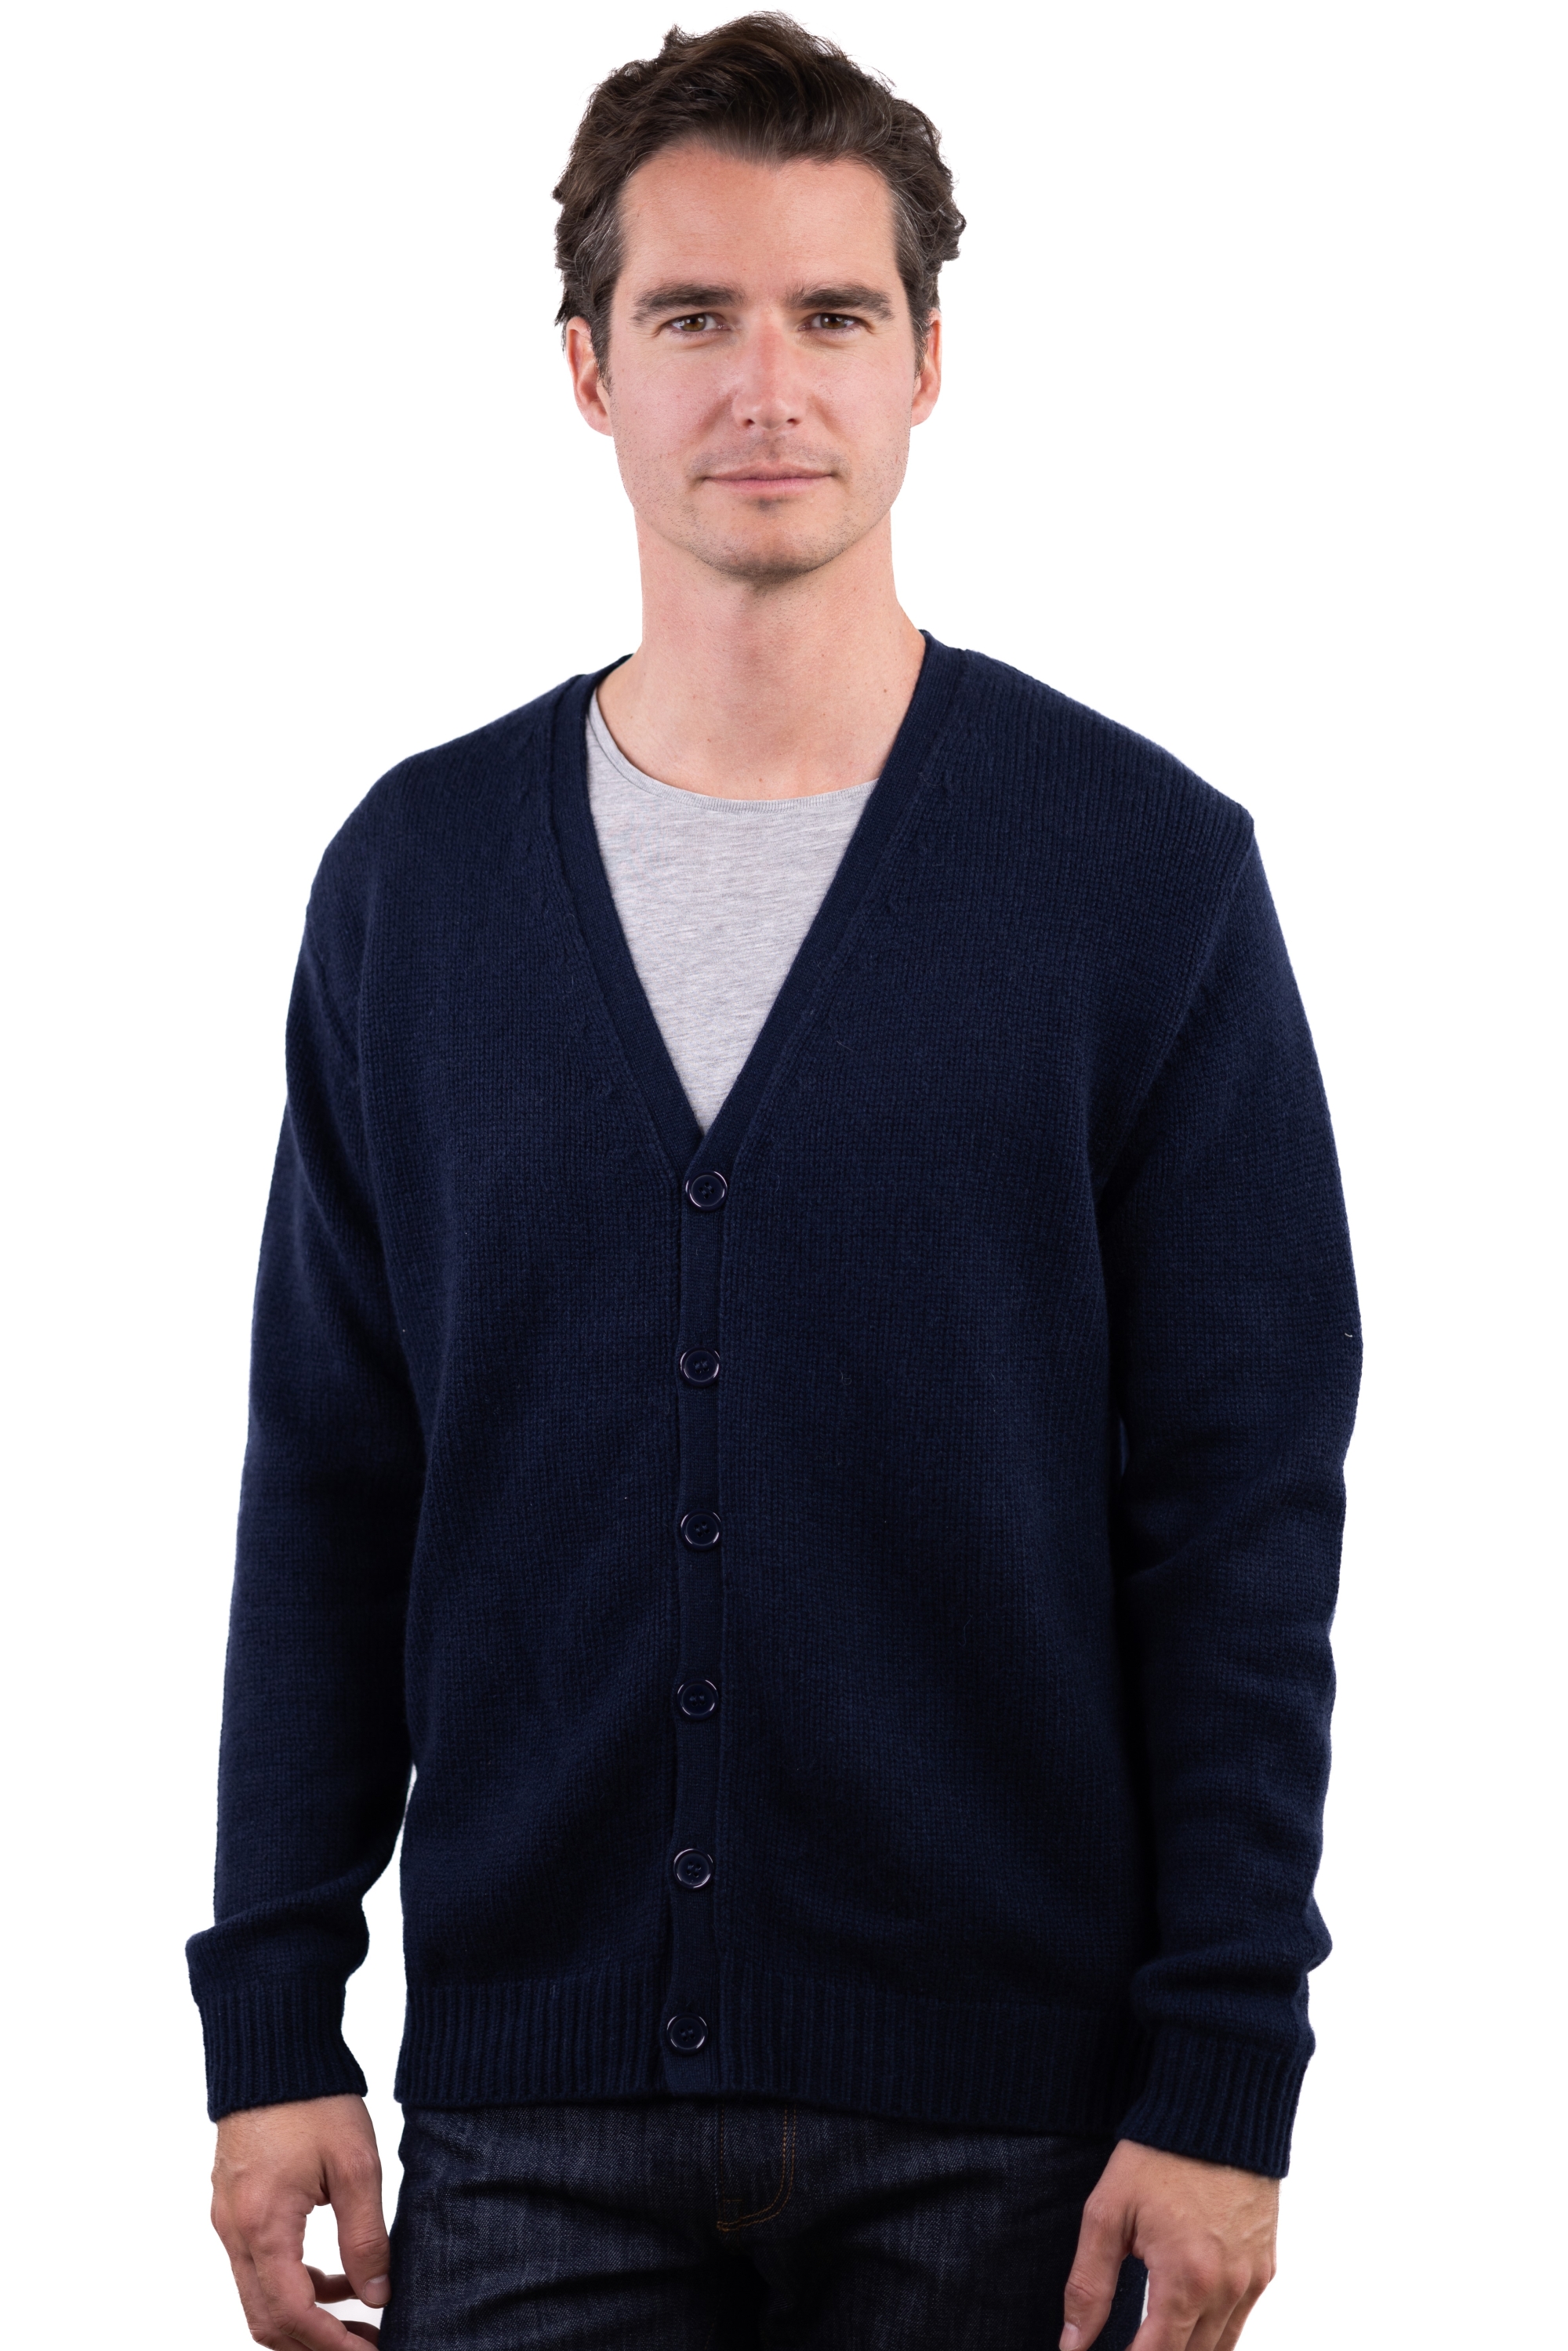 Cachemire pull homme aden marine fonce 2xl